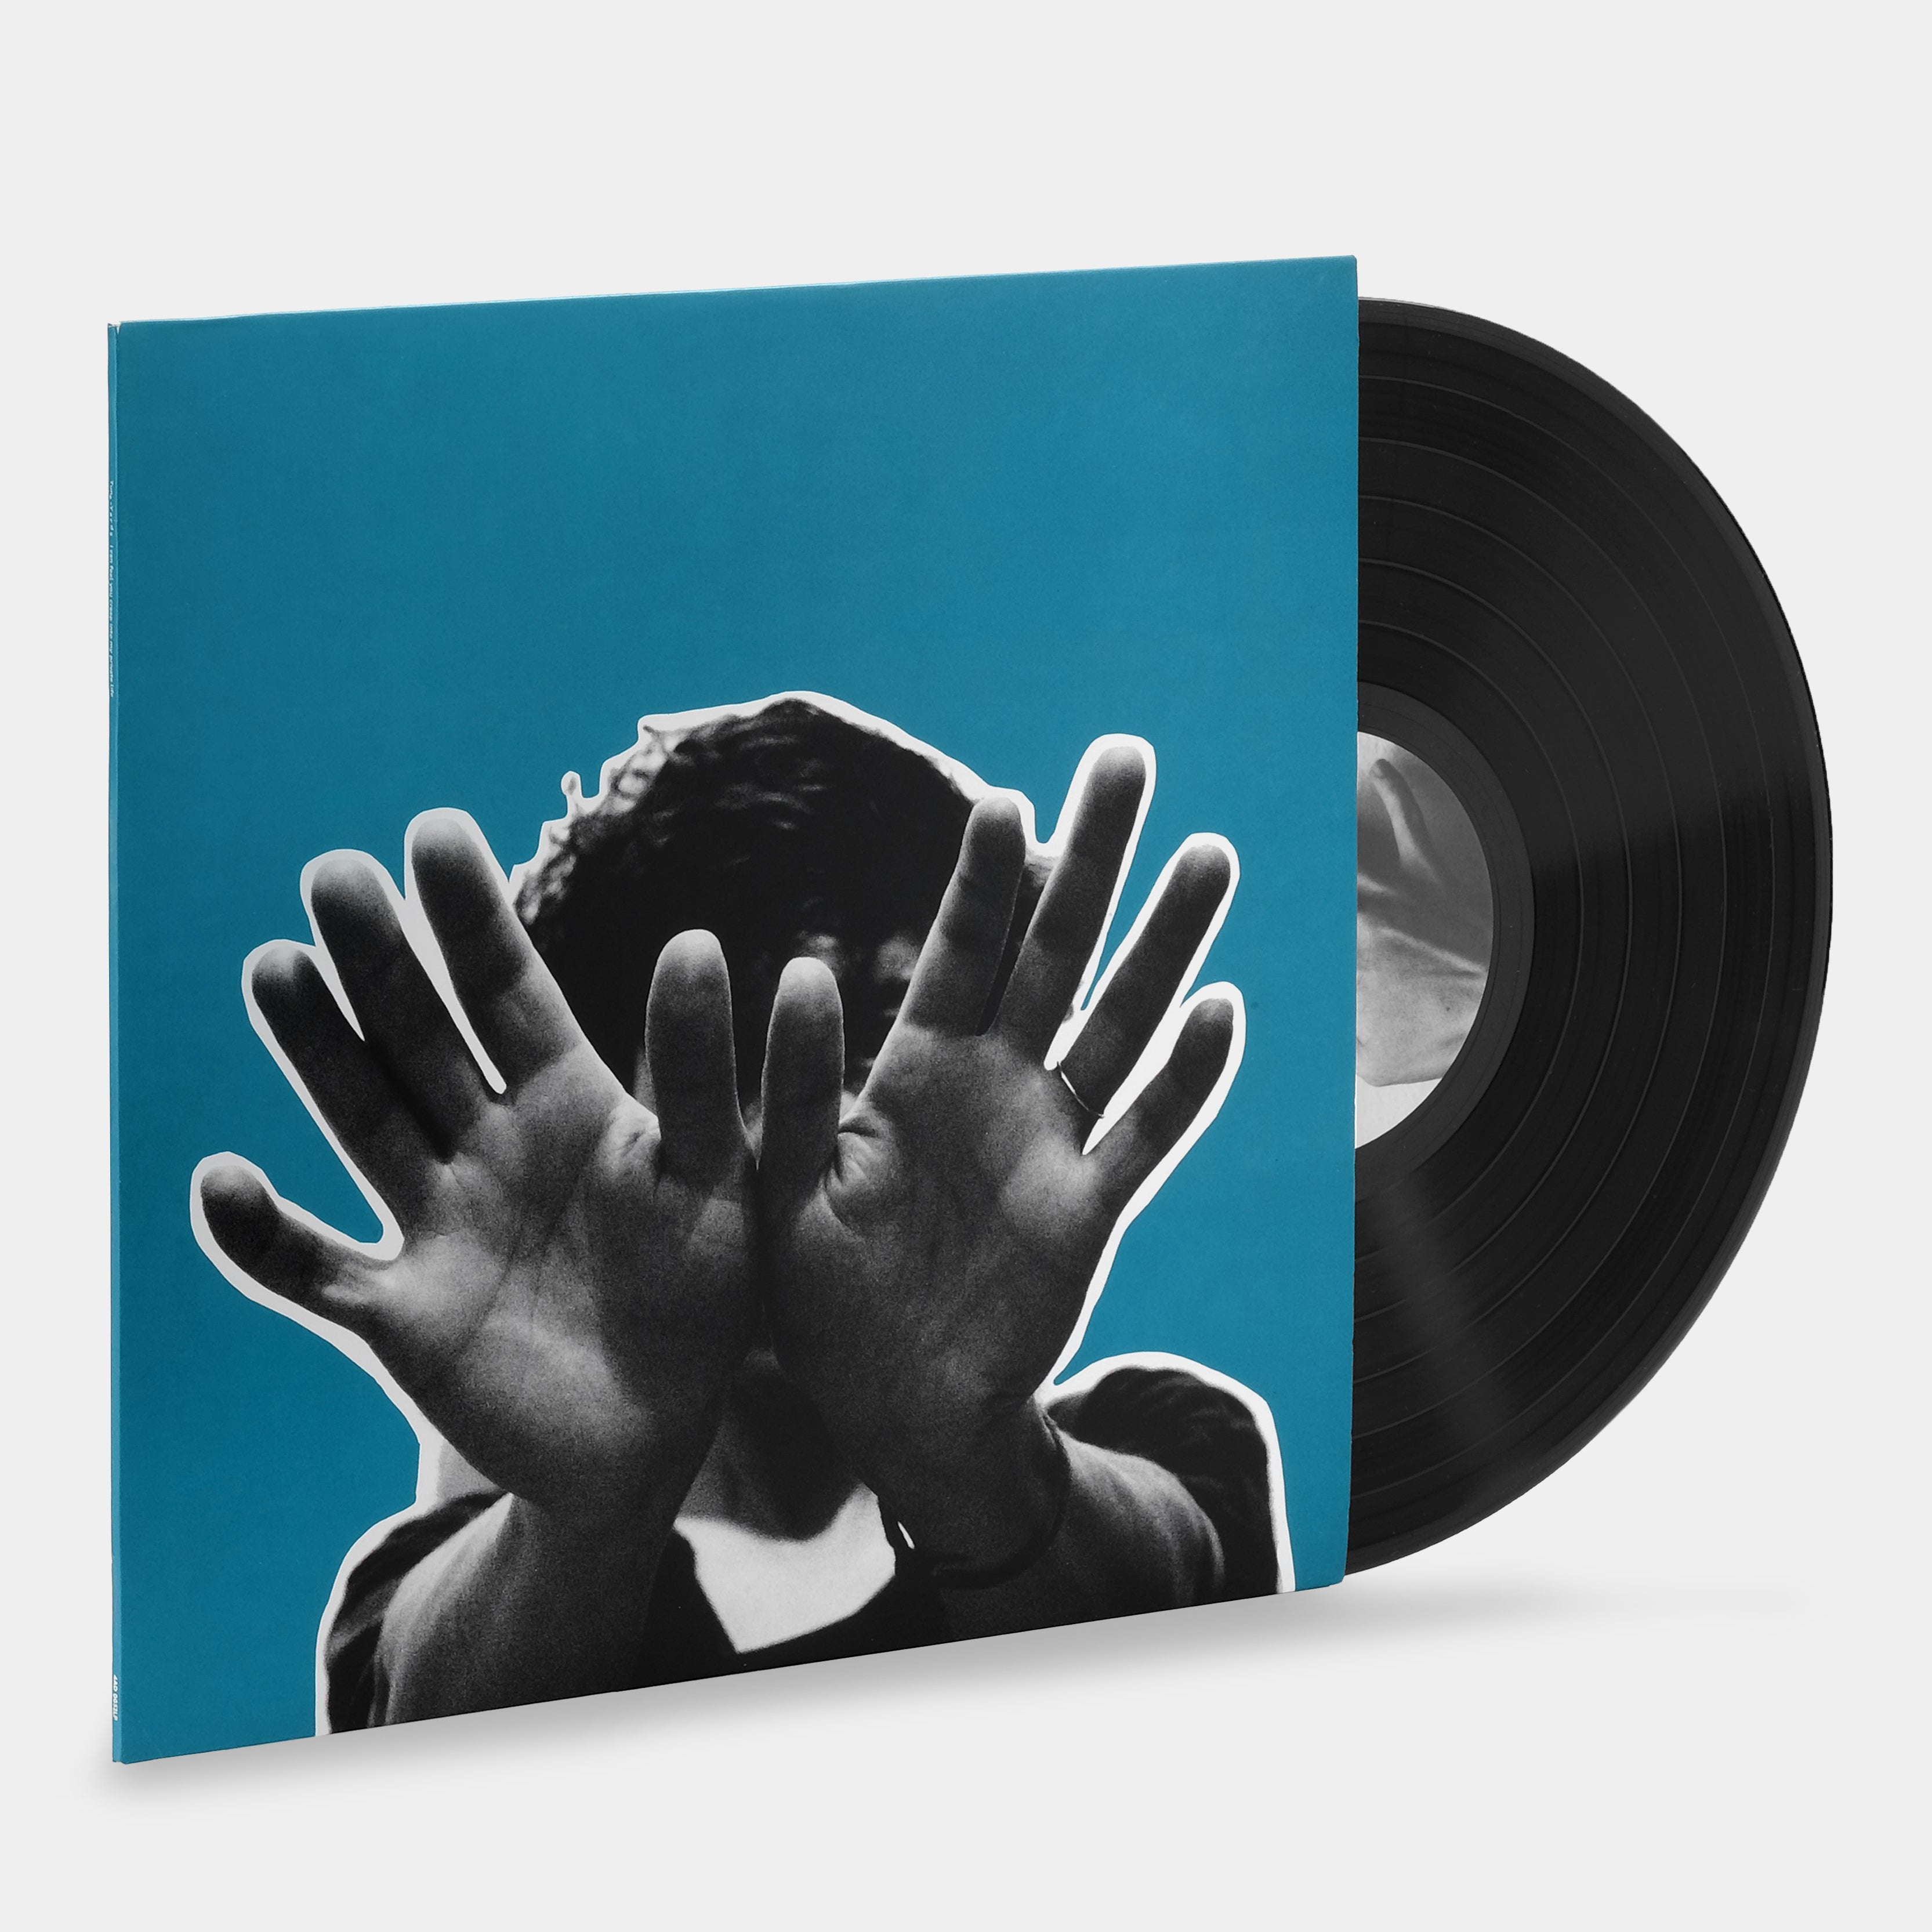 Tune-Yards - I can feel you creep into my private life LP Vinyl Record